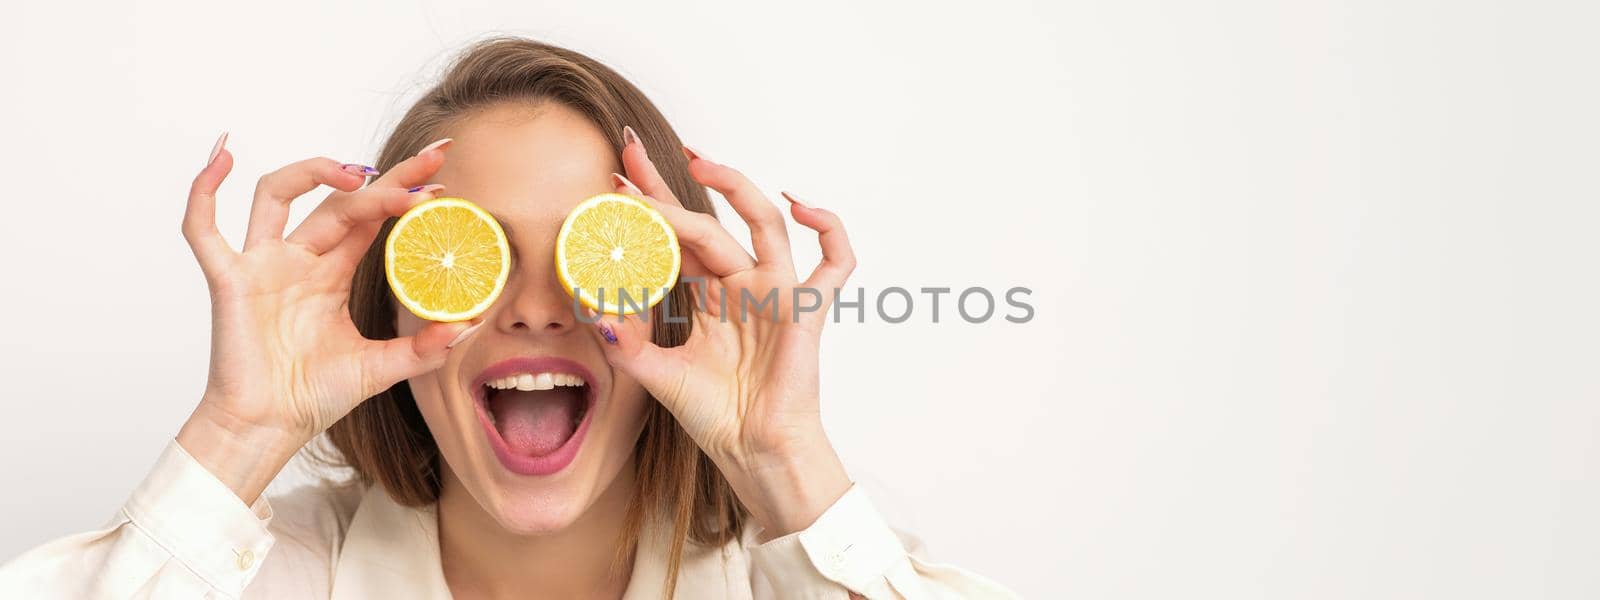 Portrait of a beautiful young woman with an open mouth holding two slices of orange at her eyes against a white background